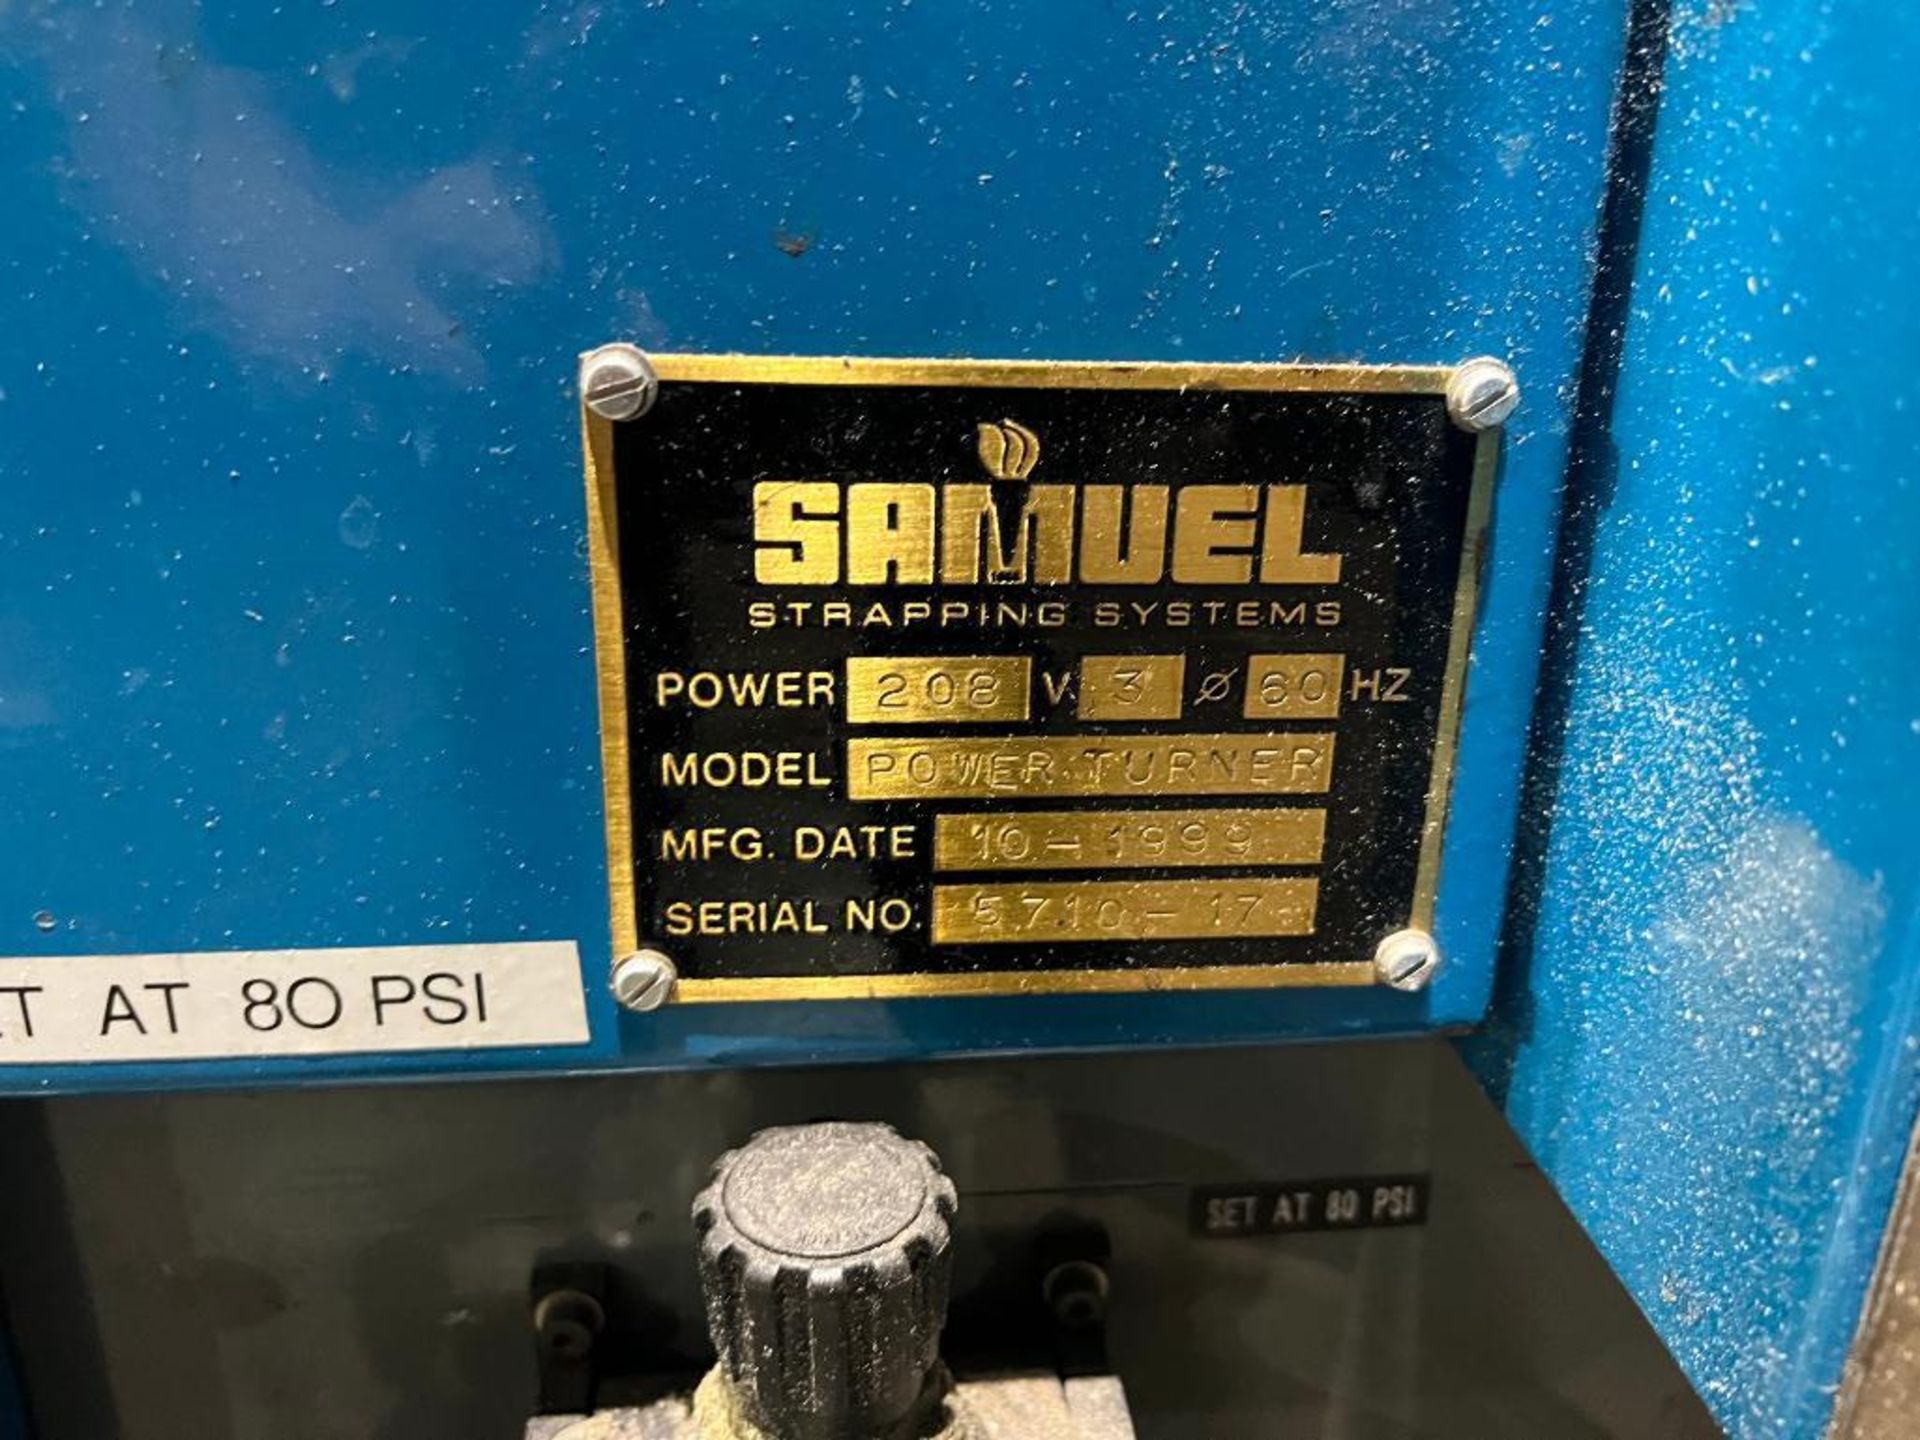 Samuel Strapping Systems Power Turner, S/N 5710-17 (1999) - Image 3 of 3